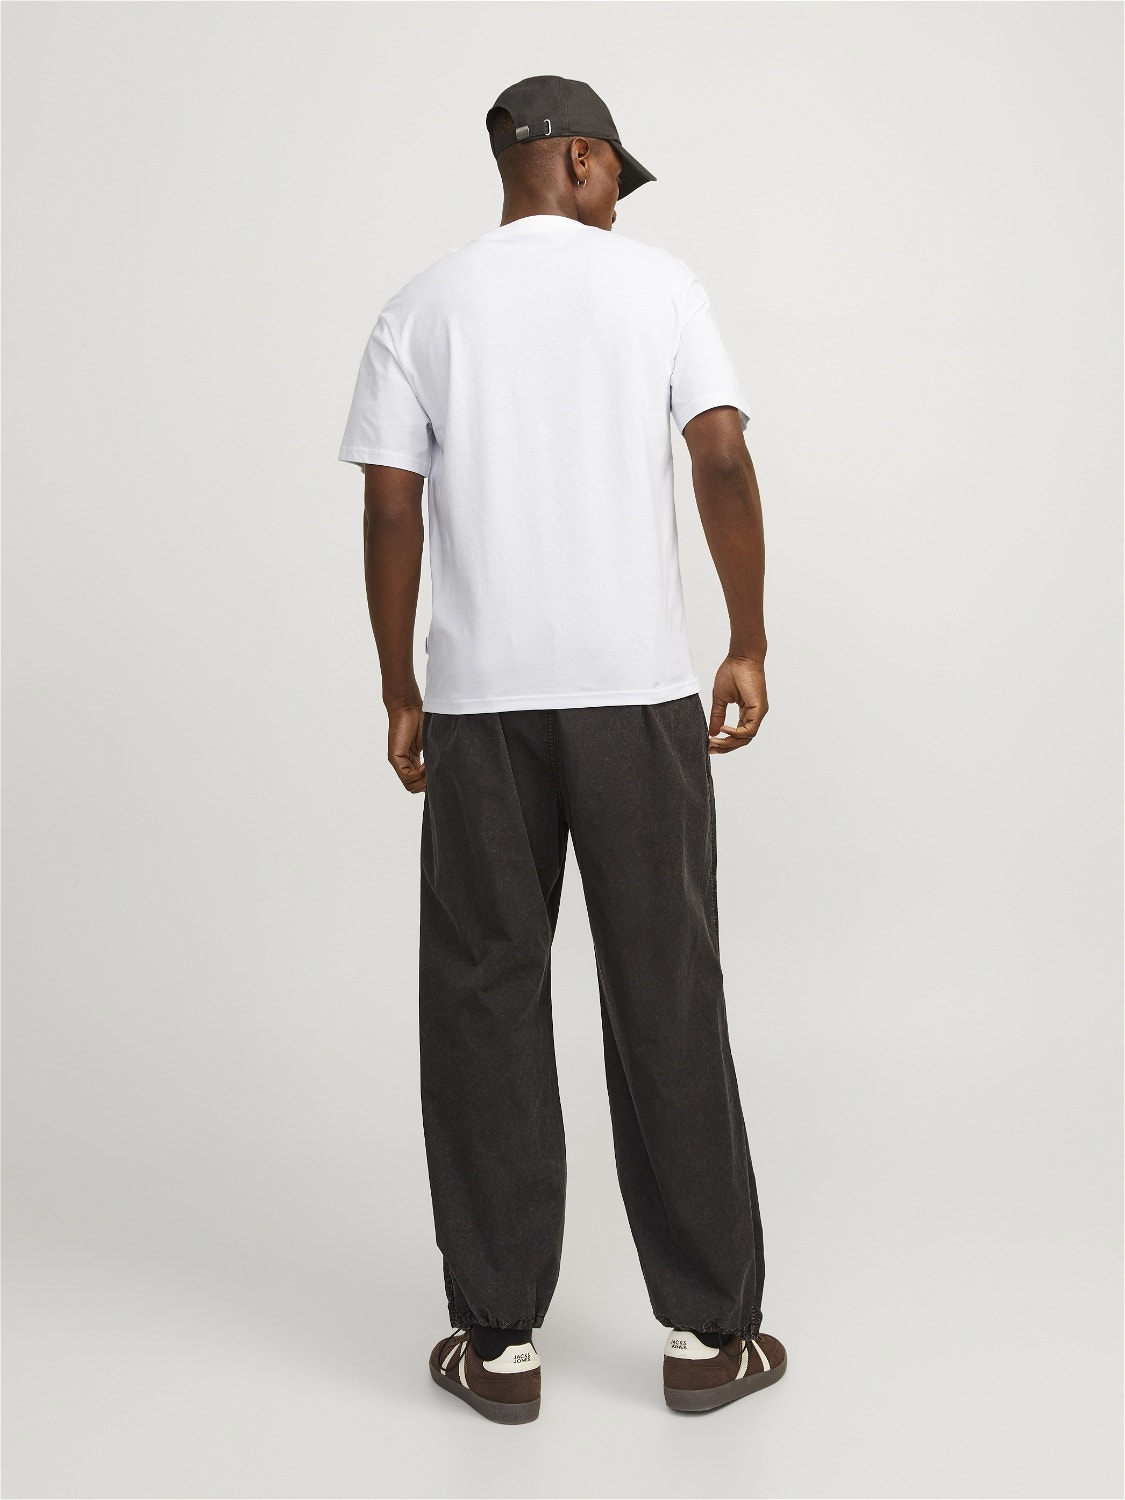 Jack & Jones Relaxed Fit Crew neck T-Shirt -Bright White - 12256717